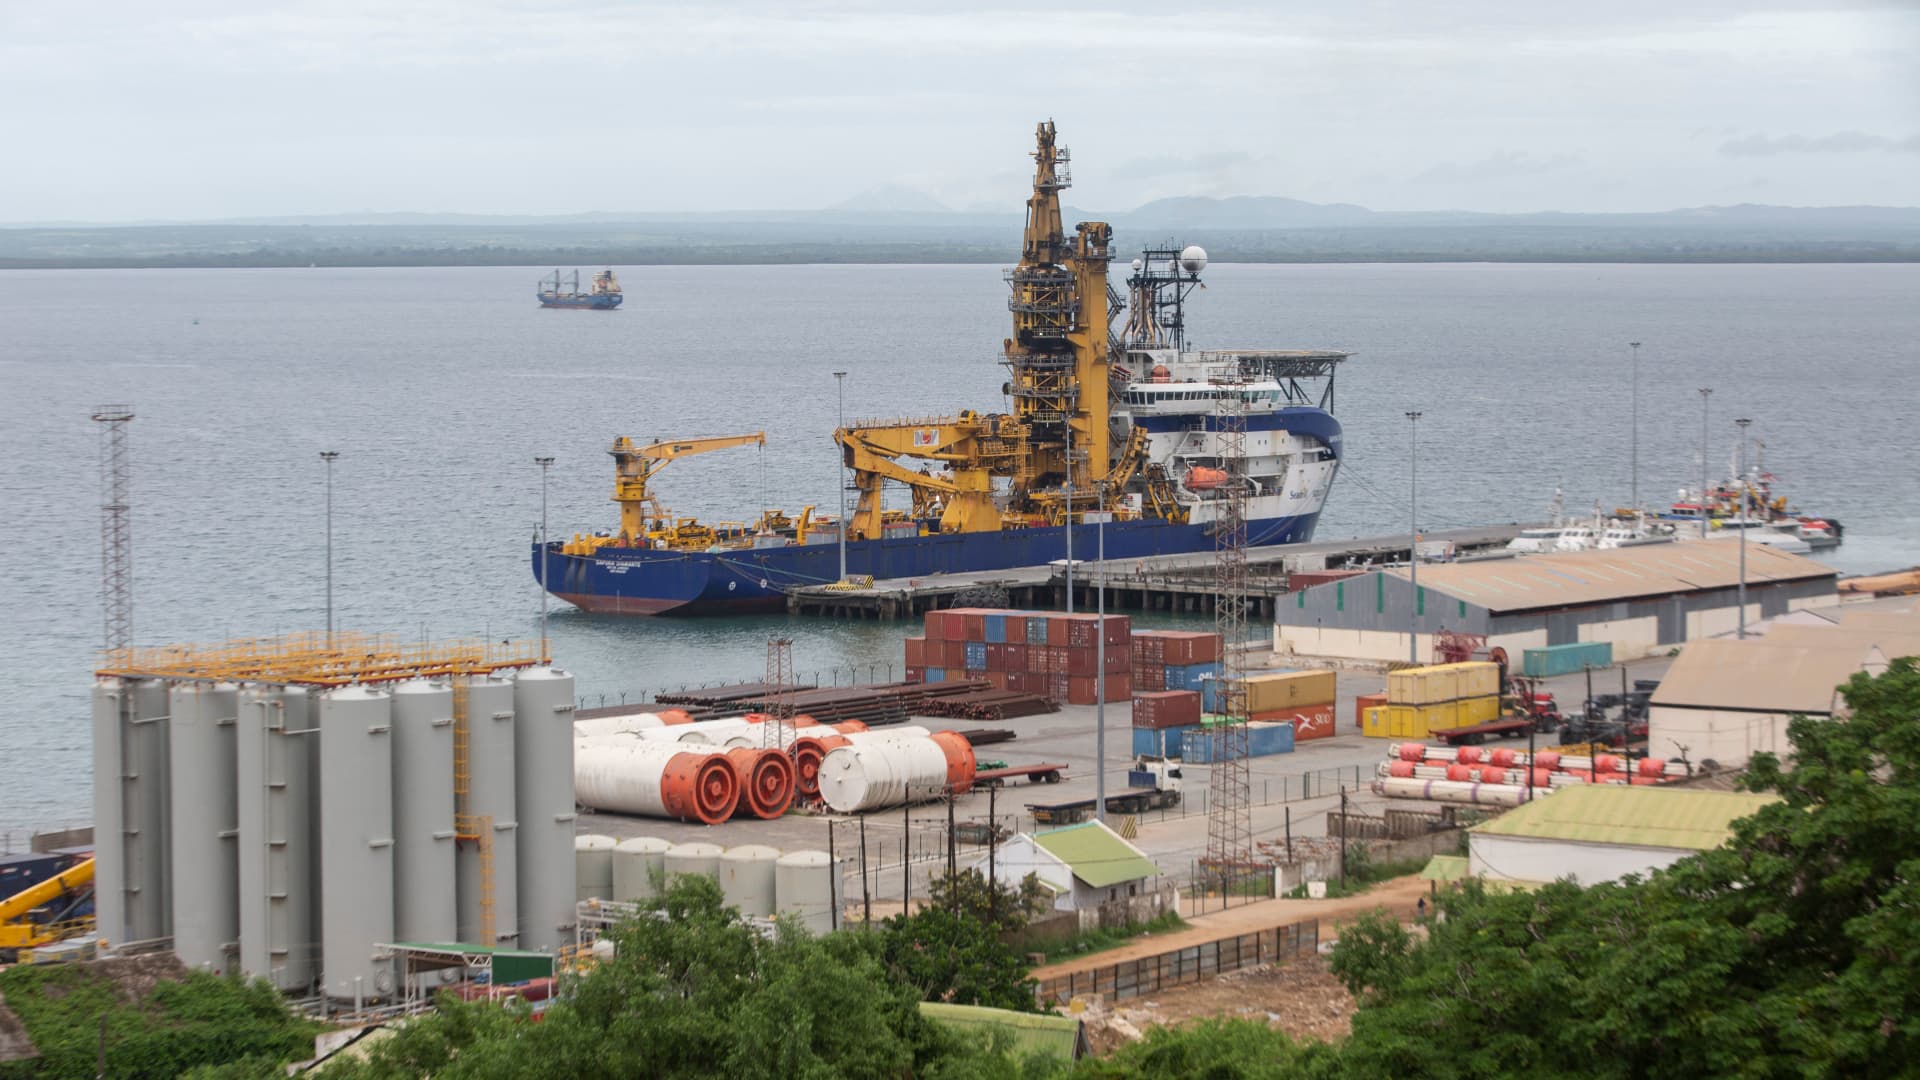 Pemba, MOZAMBIQUE - The OCSV Sapura Diamante (Offshore Construction Support Vessel), a pipe layer vessel used in offshore construction, is seen docked at the port of Pemba where sailing boats are expected to arrive with people displaced from the coasts of Palma and Afungi after suffering attacks by armed groups on March 30, 2021.